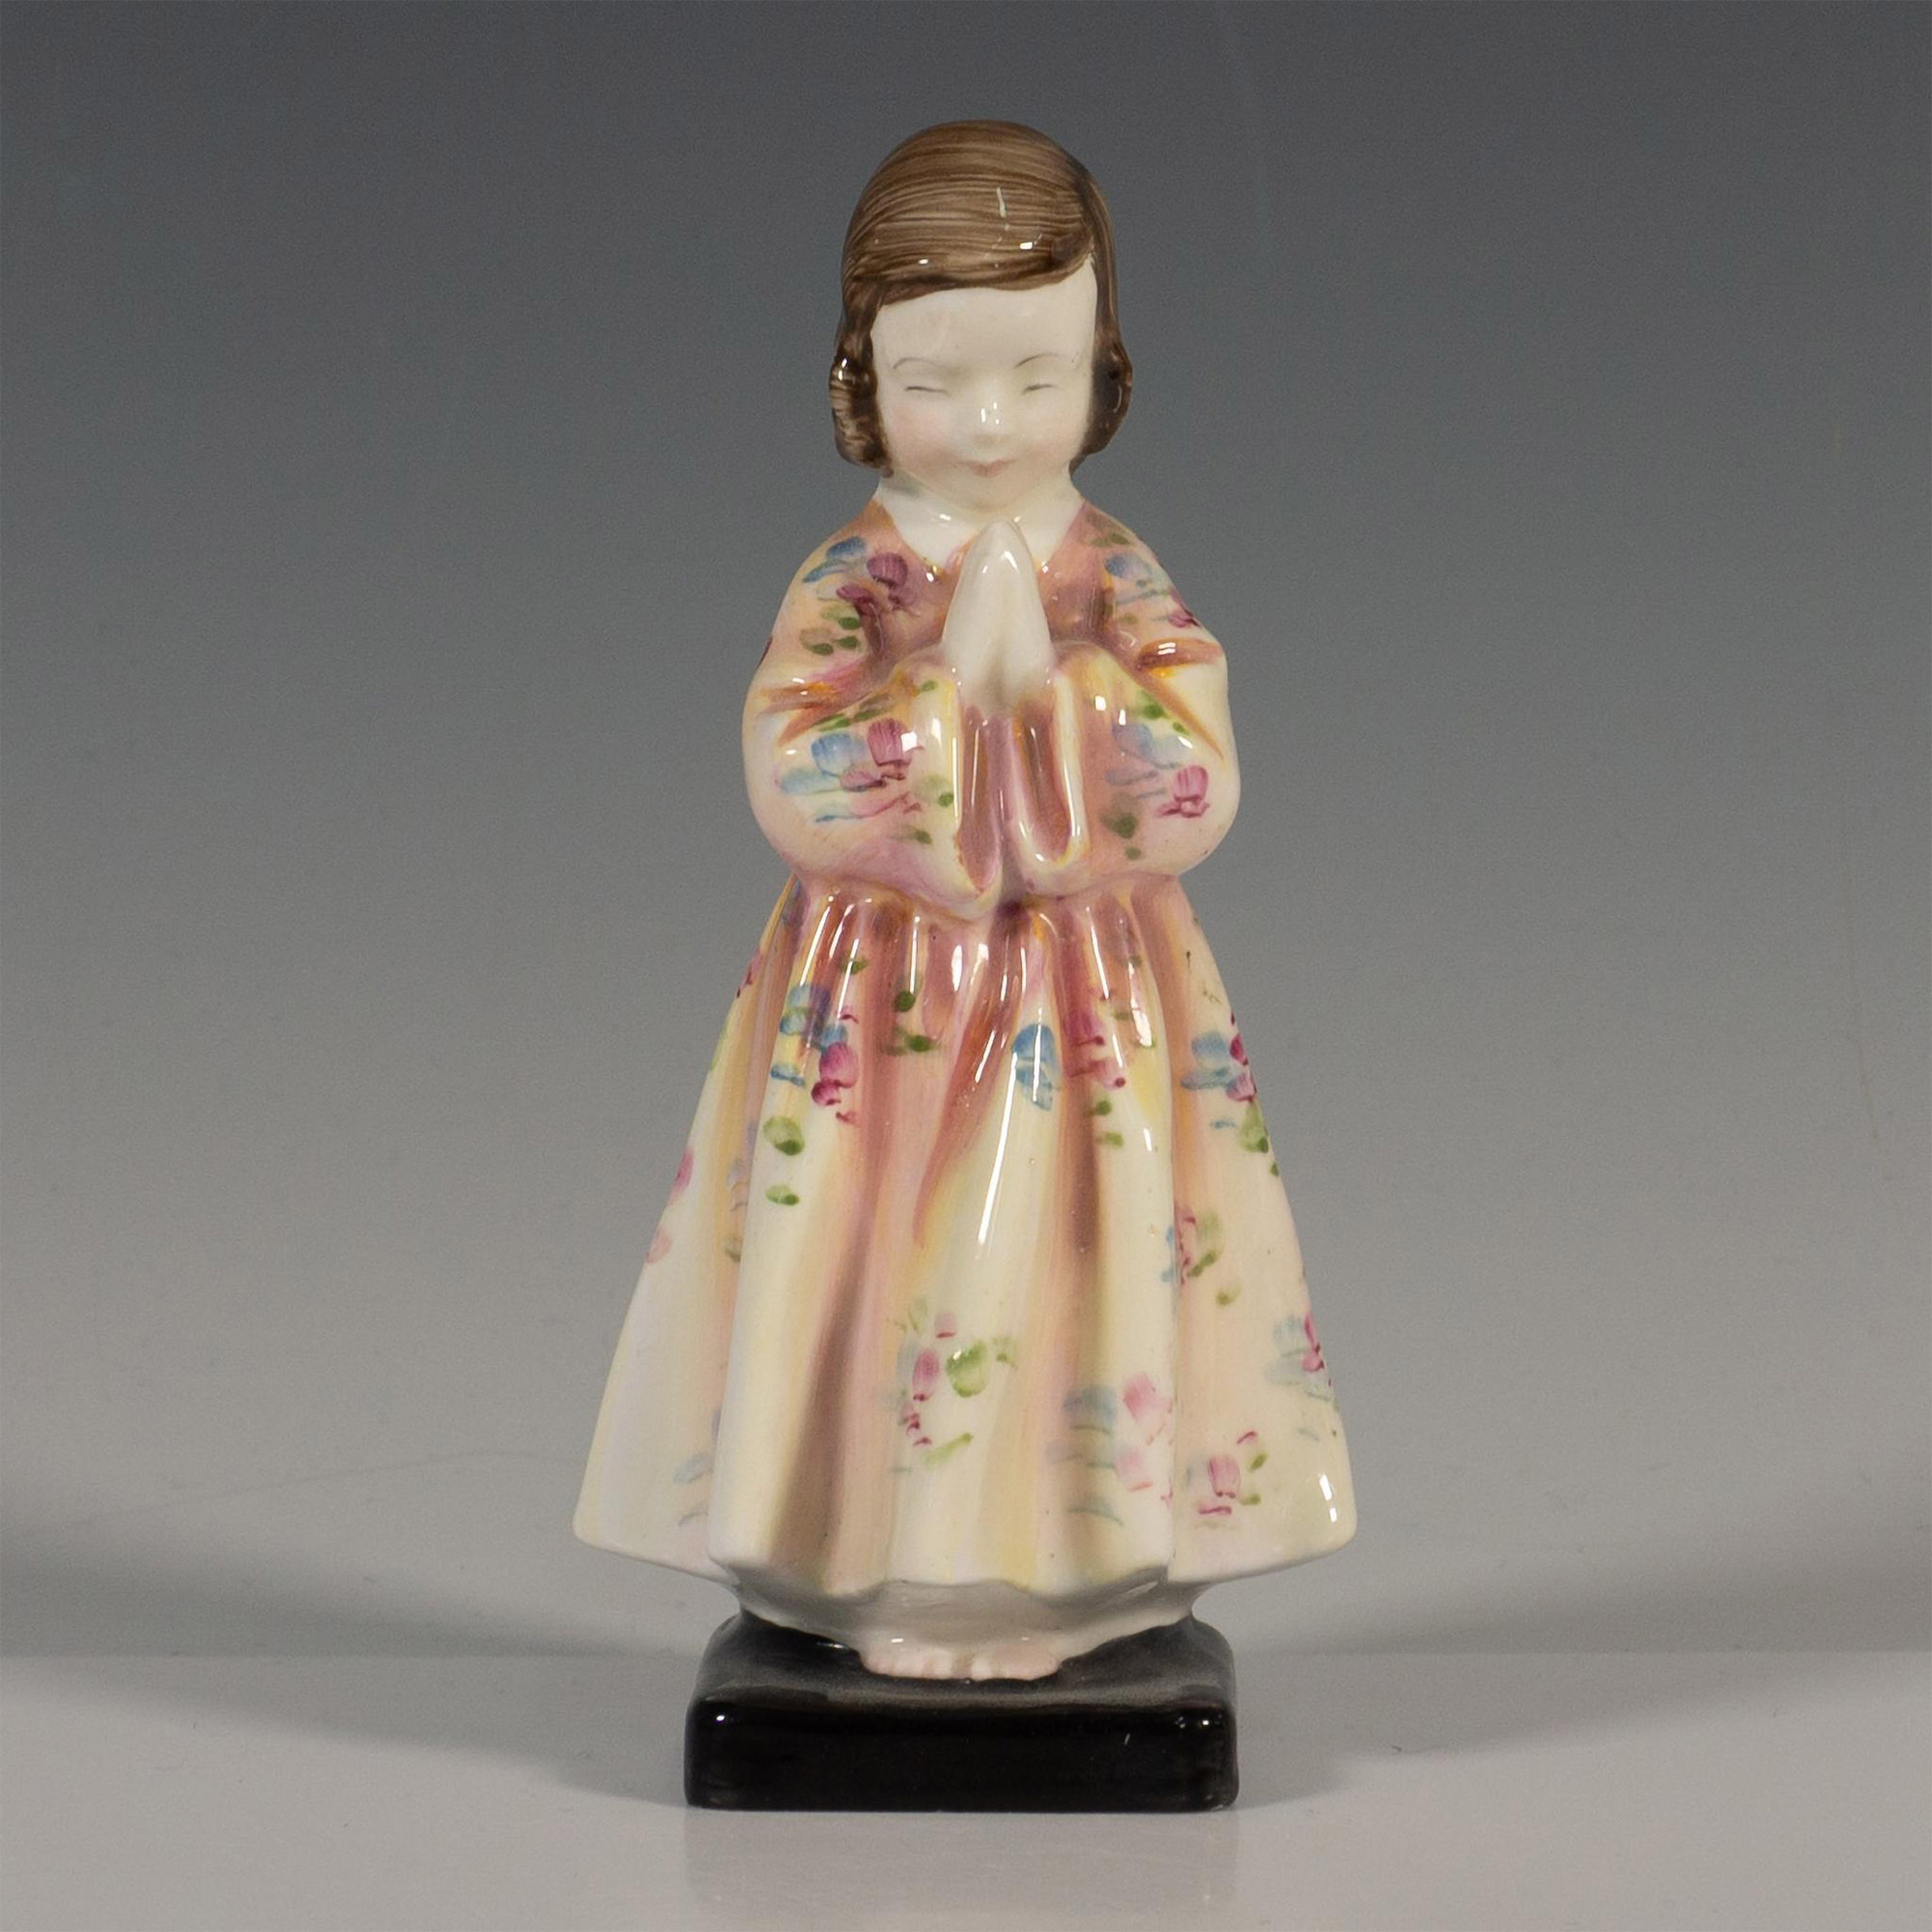 Bedtime HN1978, Prototype Colorway - Royal Doulton Figurine - Image 2 of 5